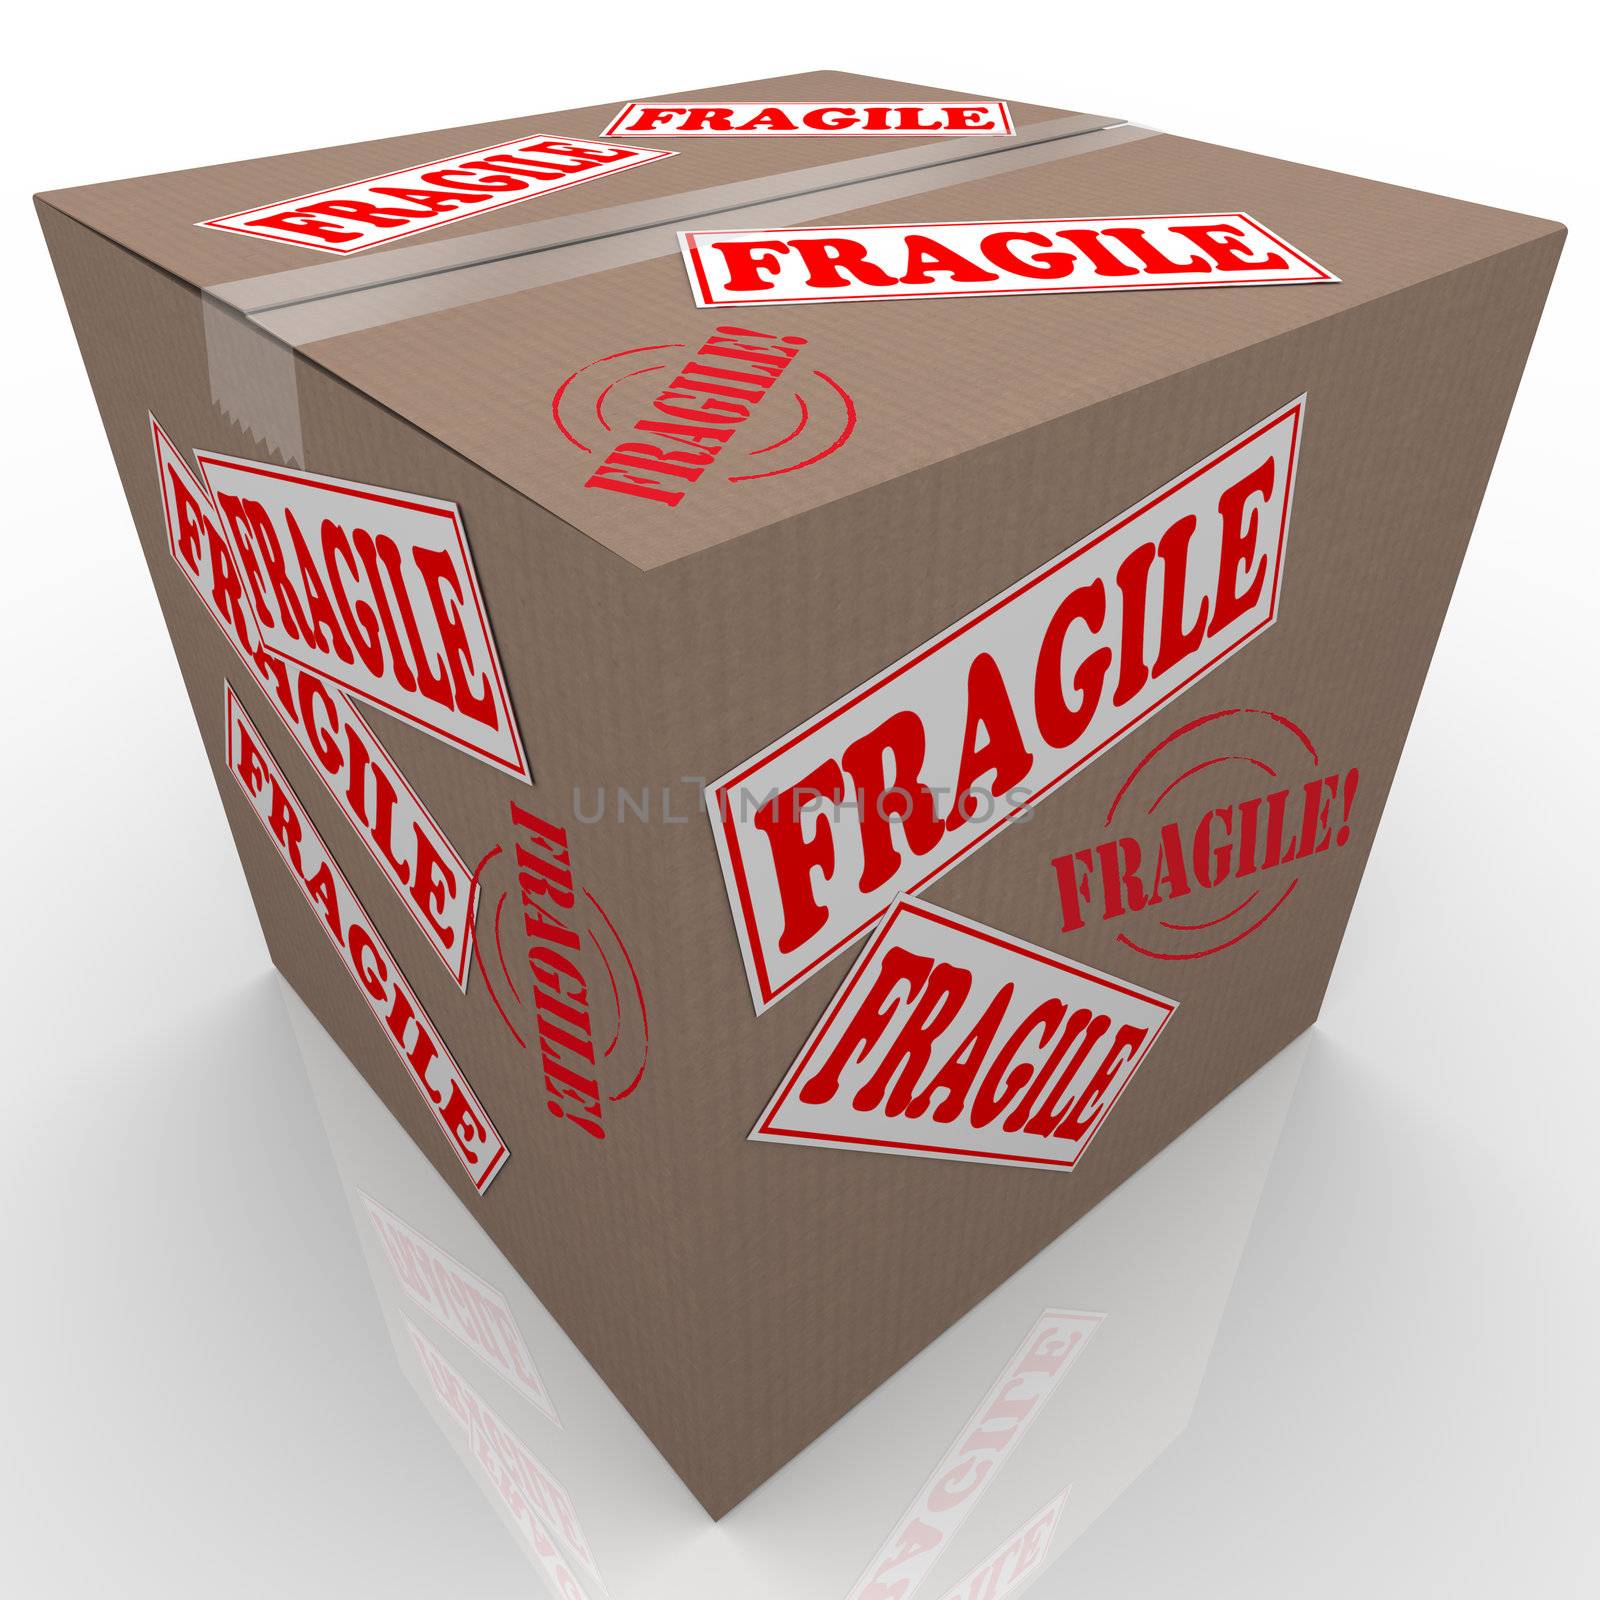 Fragile Cardboard Box Shipment Package Handle with Care by iQoncept